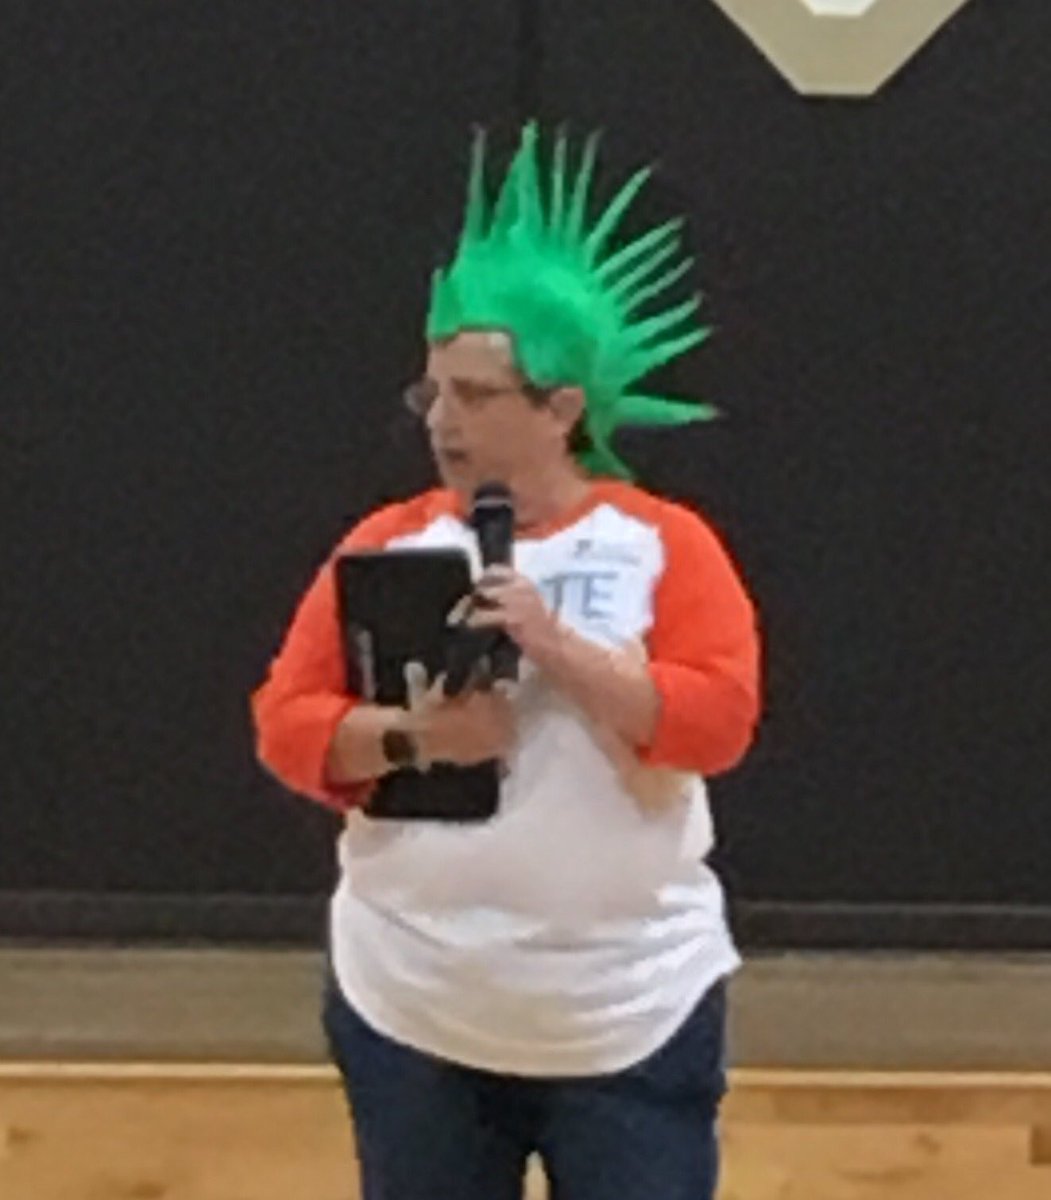 It's #hammertime and #igniteSPS time for #jeffriesjaguars -@dhammer31 's hair is on point!